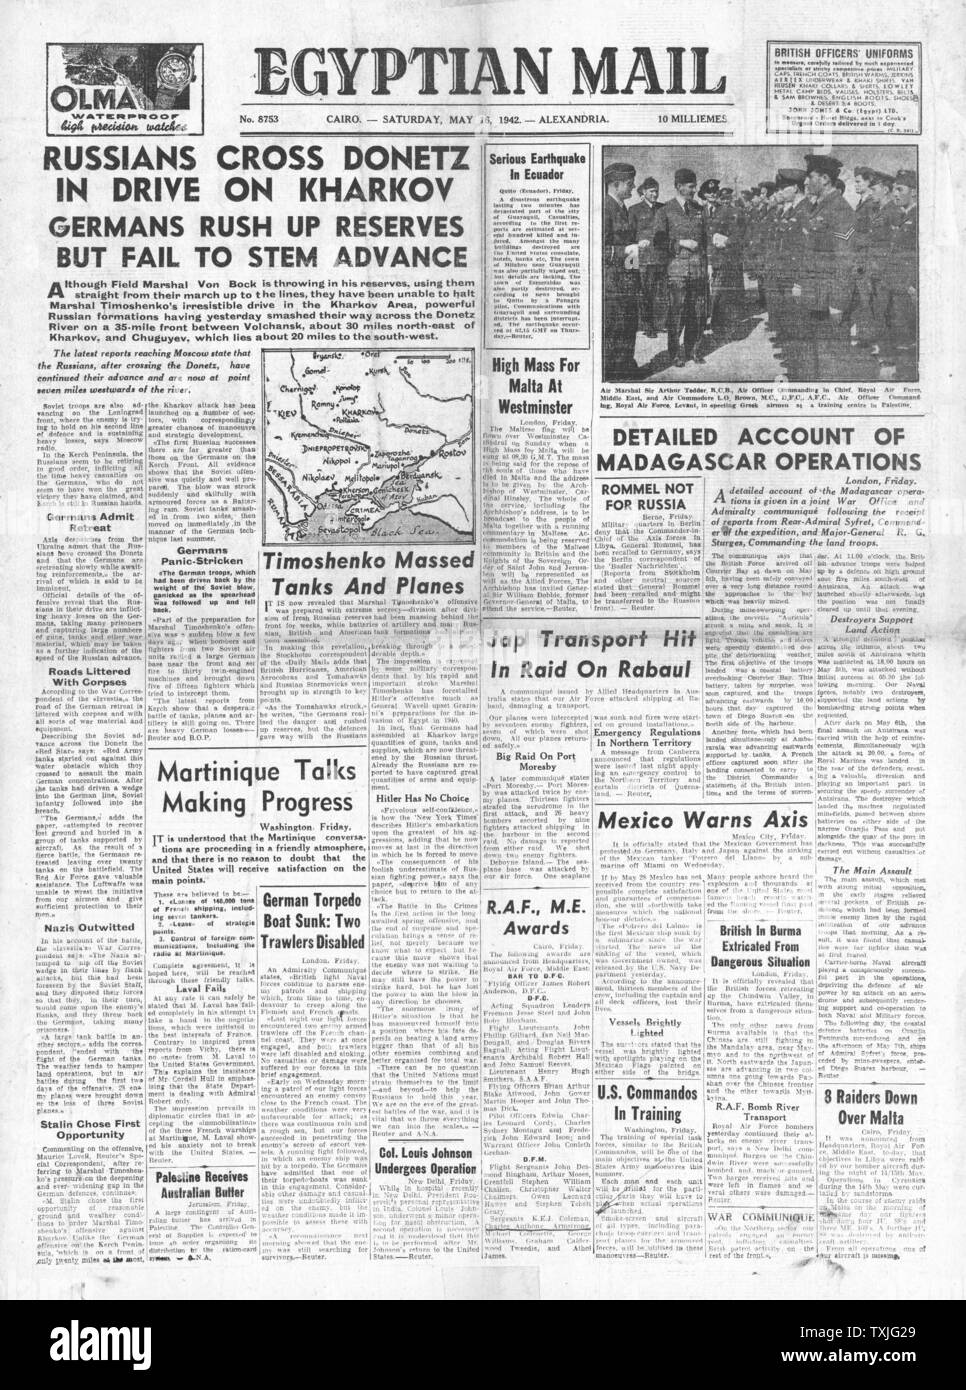 1942 front page Egyptian Mail Russian Army advance on Kharkov Stock Photo